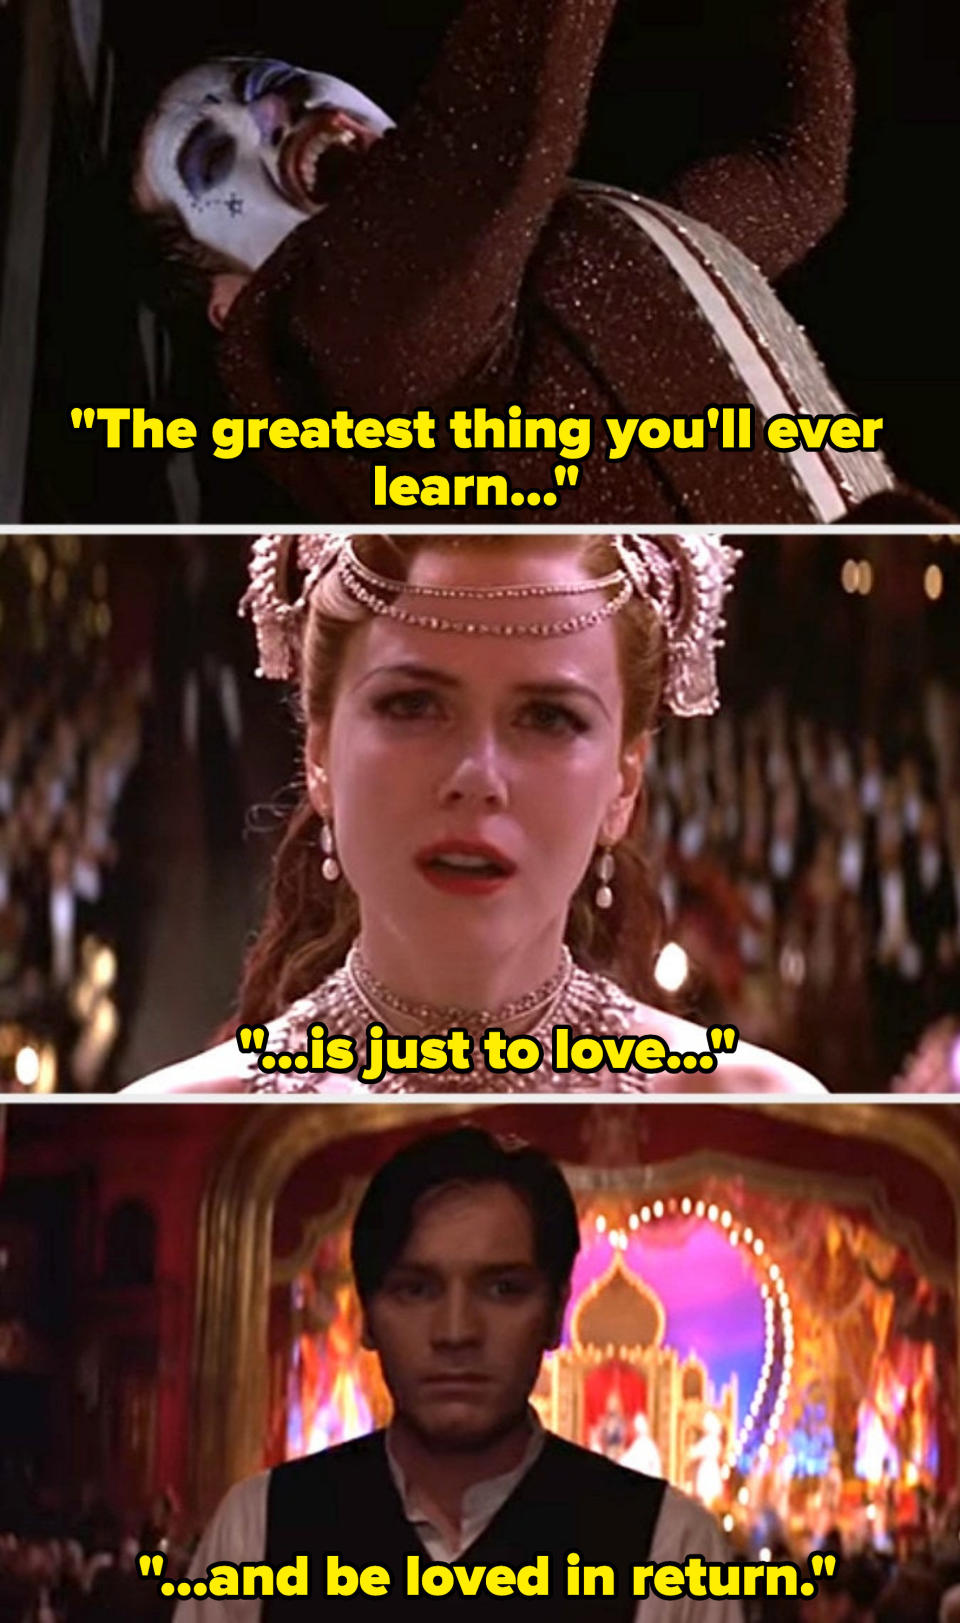 Screenshots from "Moulin Rouge!"